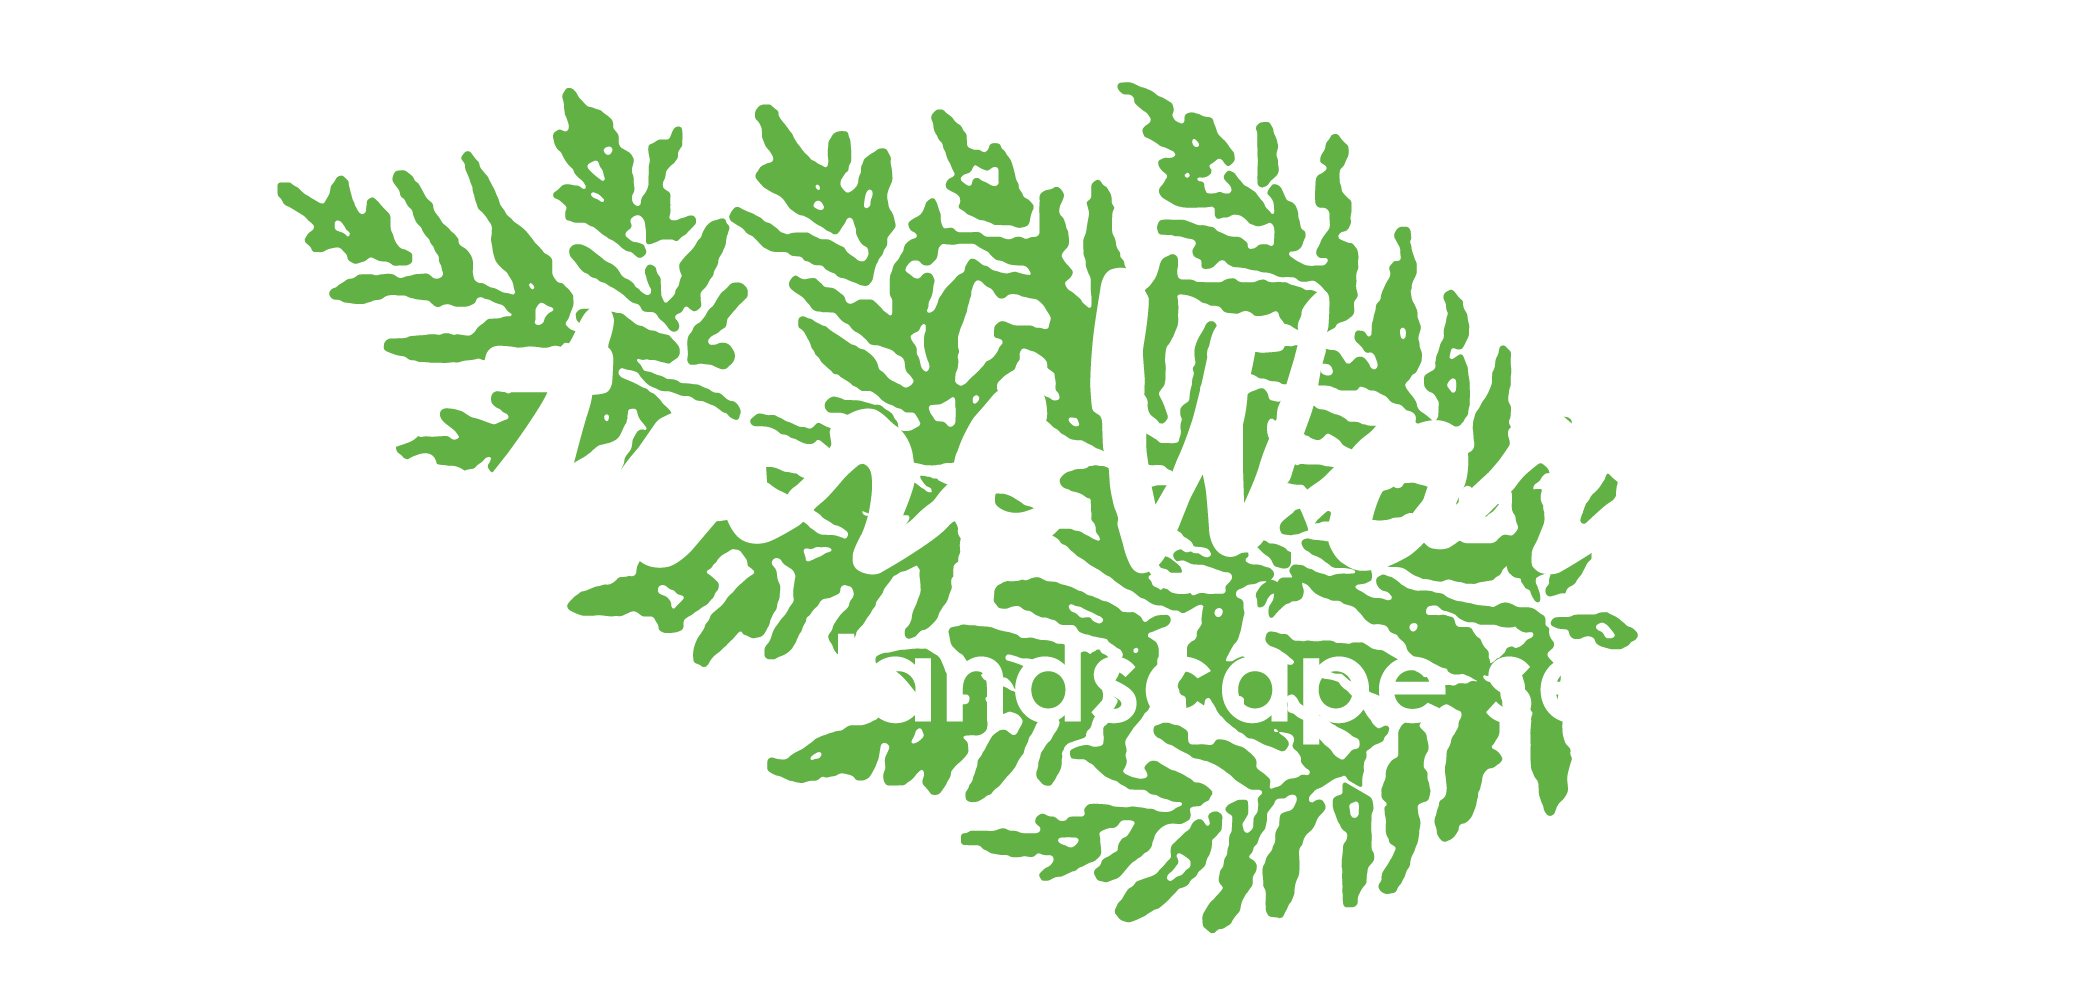 This image features a logo with stylized green leaves forming a circle, white text "NatureWorks," and "landscape services" on a black background.